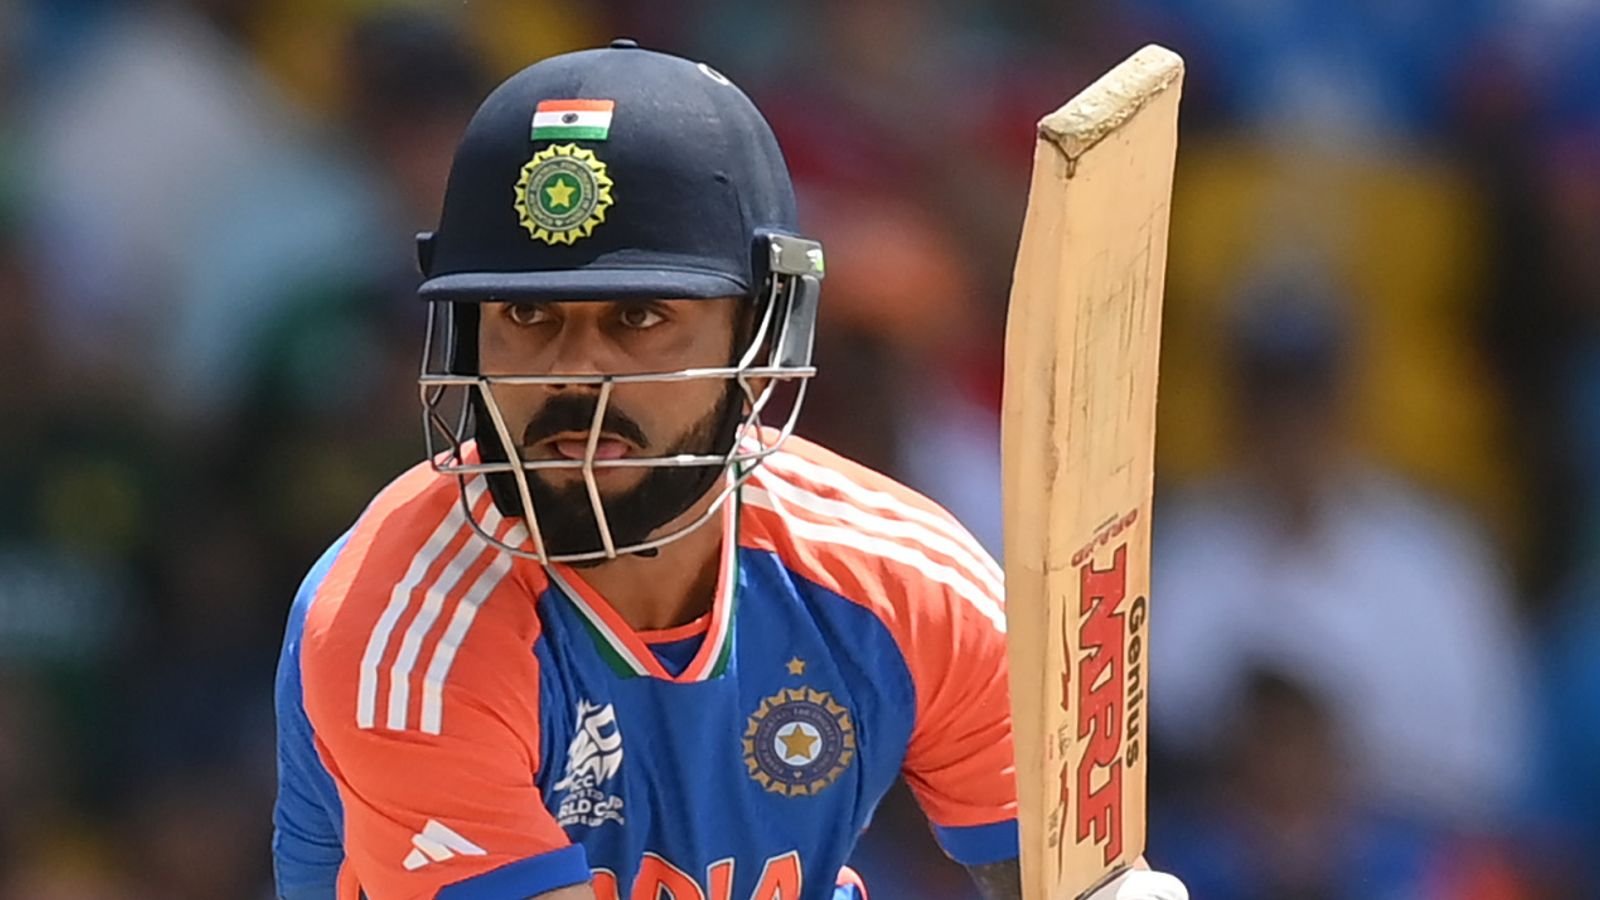 India’s Virat Kohli retires from T20 international cricket after World Cup win over South Africa | Cricket News